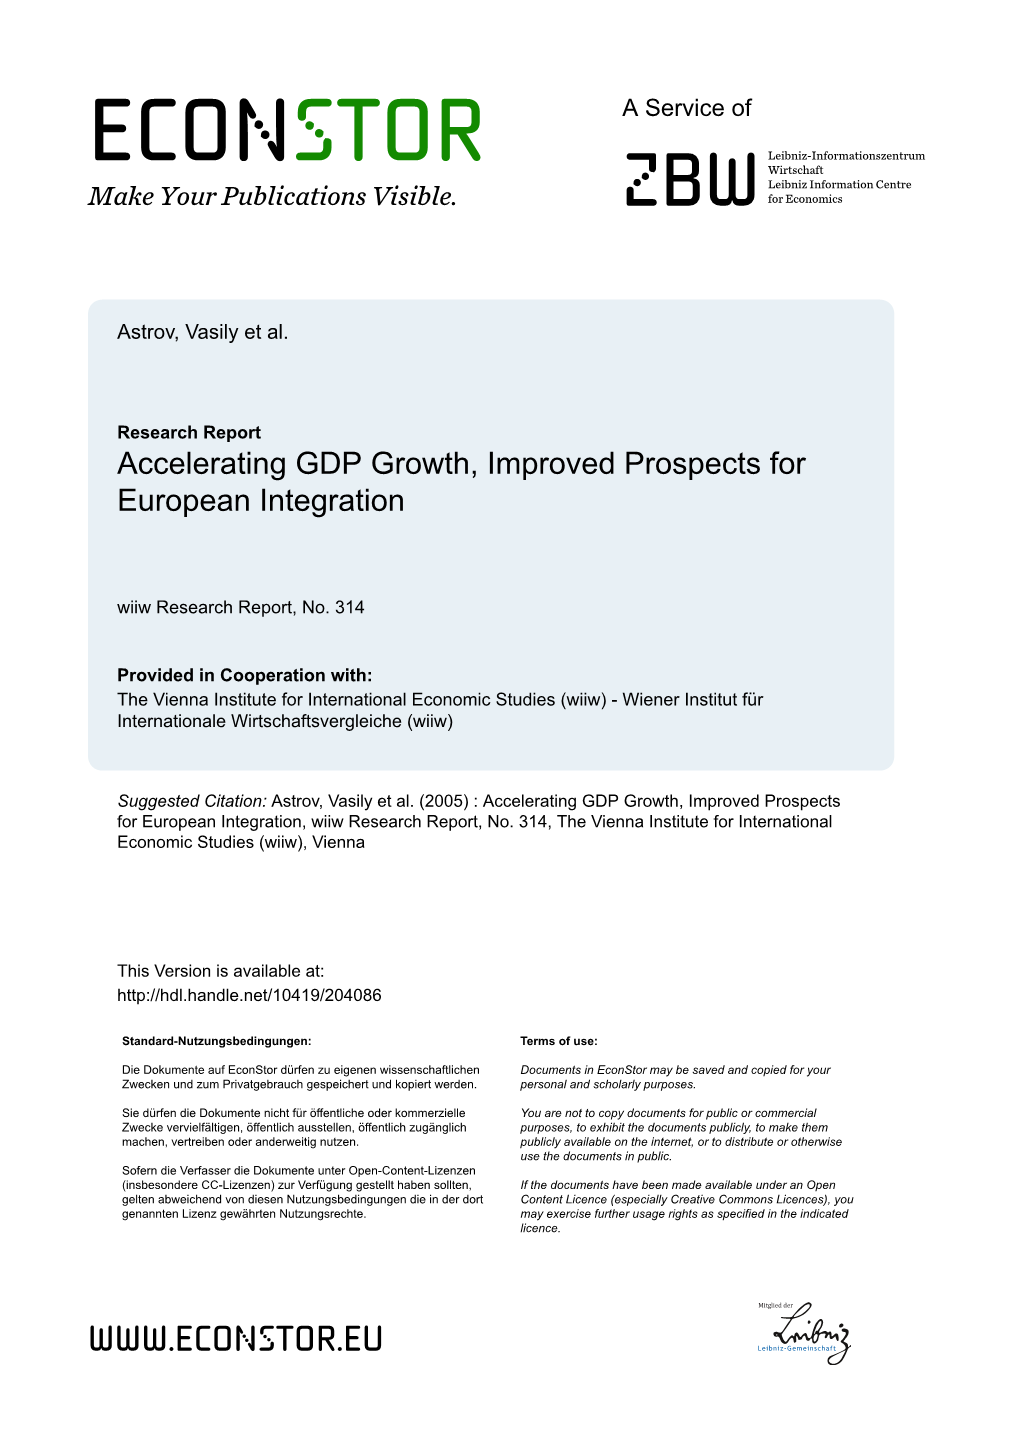 Accelerating GDP Growth, Improved Prospects for European Integration